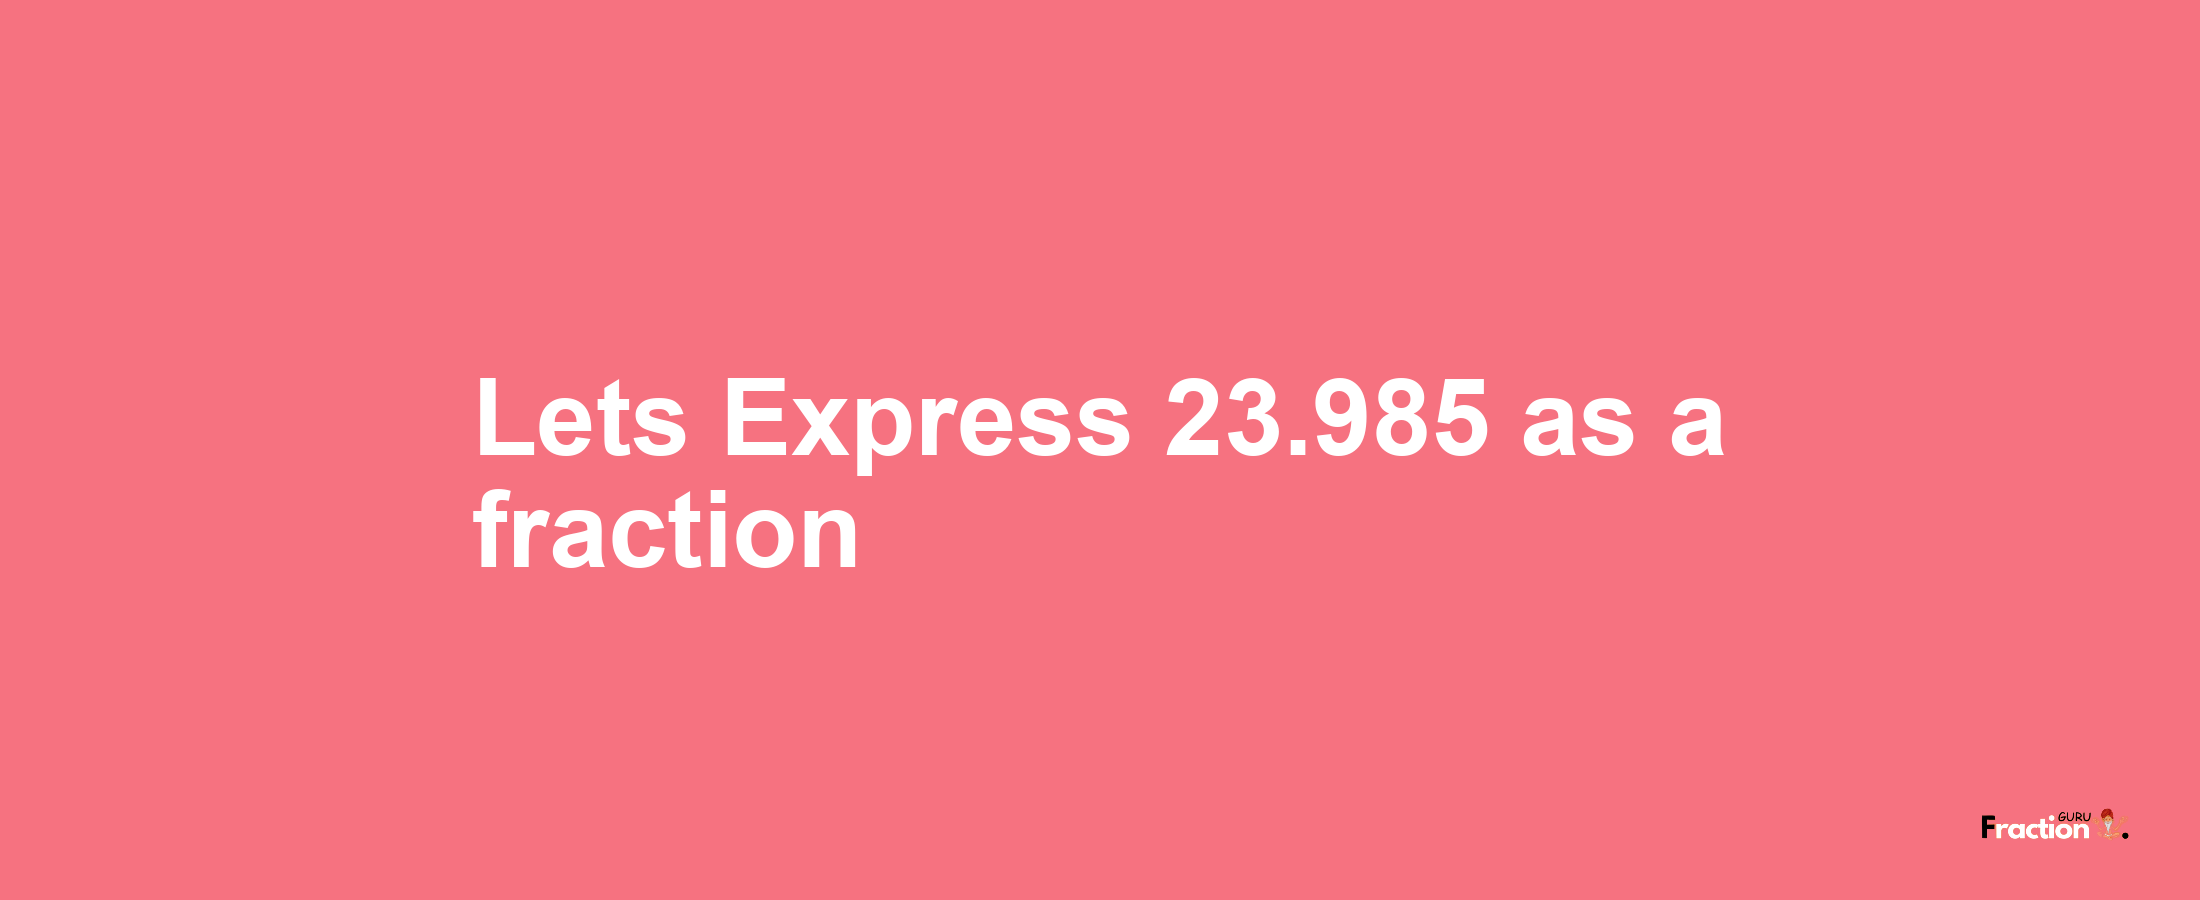 Lets Express 23.985 as afraction